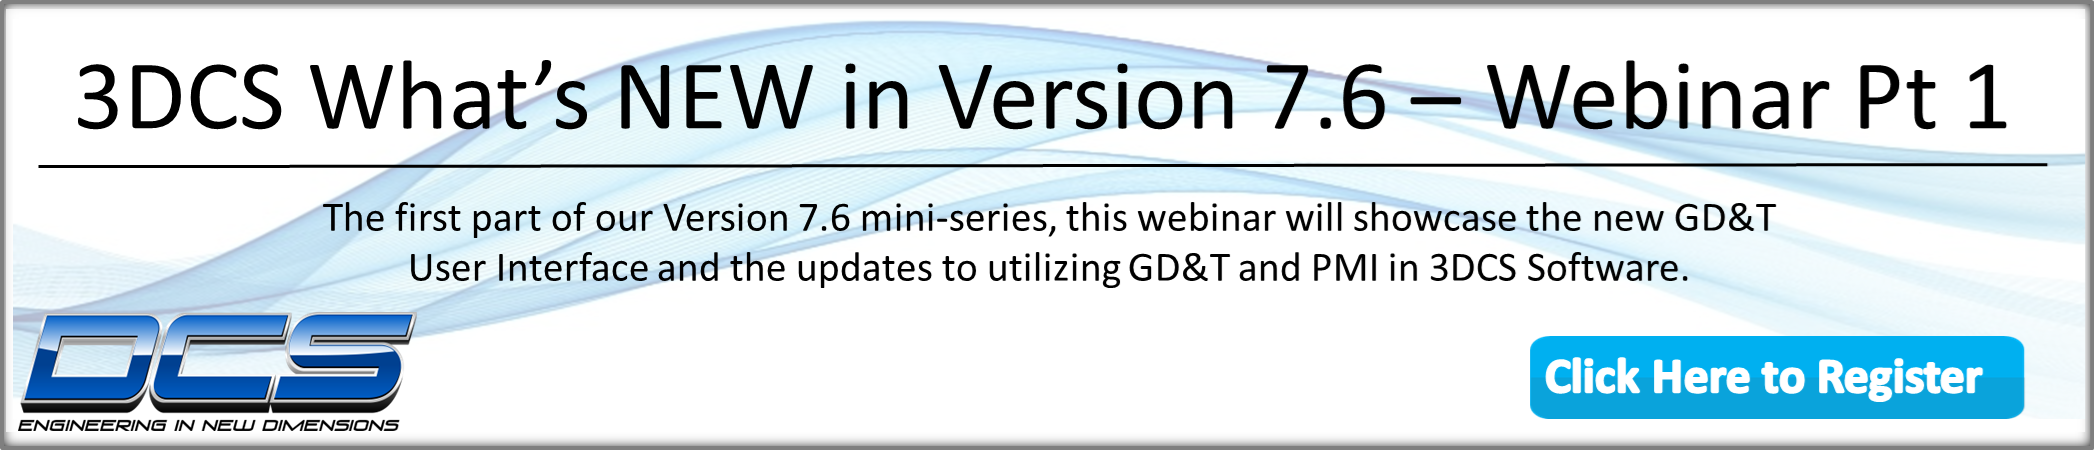 What's new in 3DCS V7.6 -- GD&T Interface